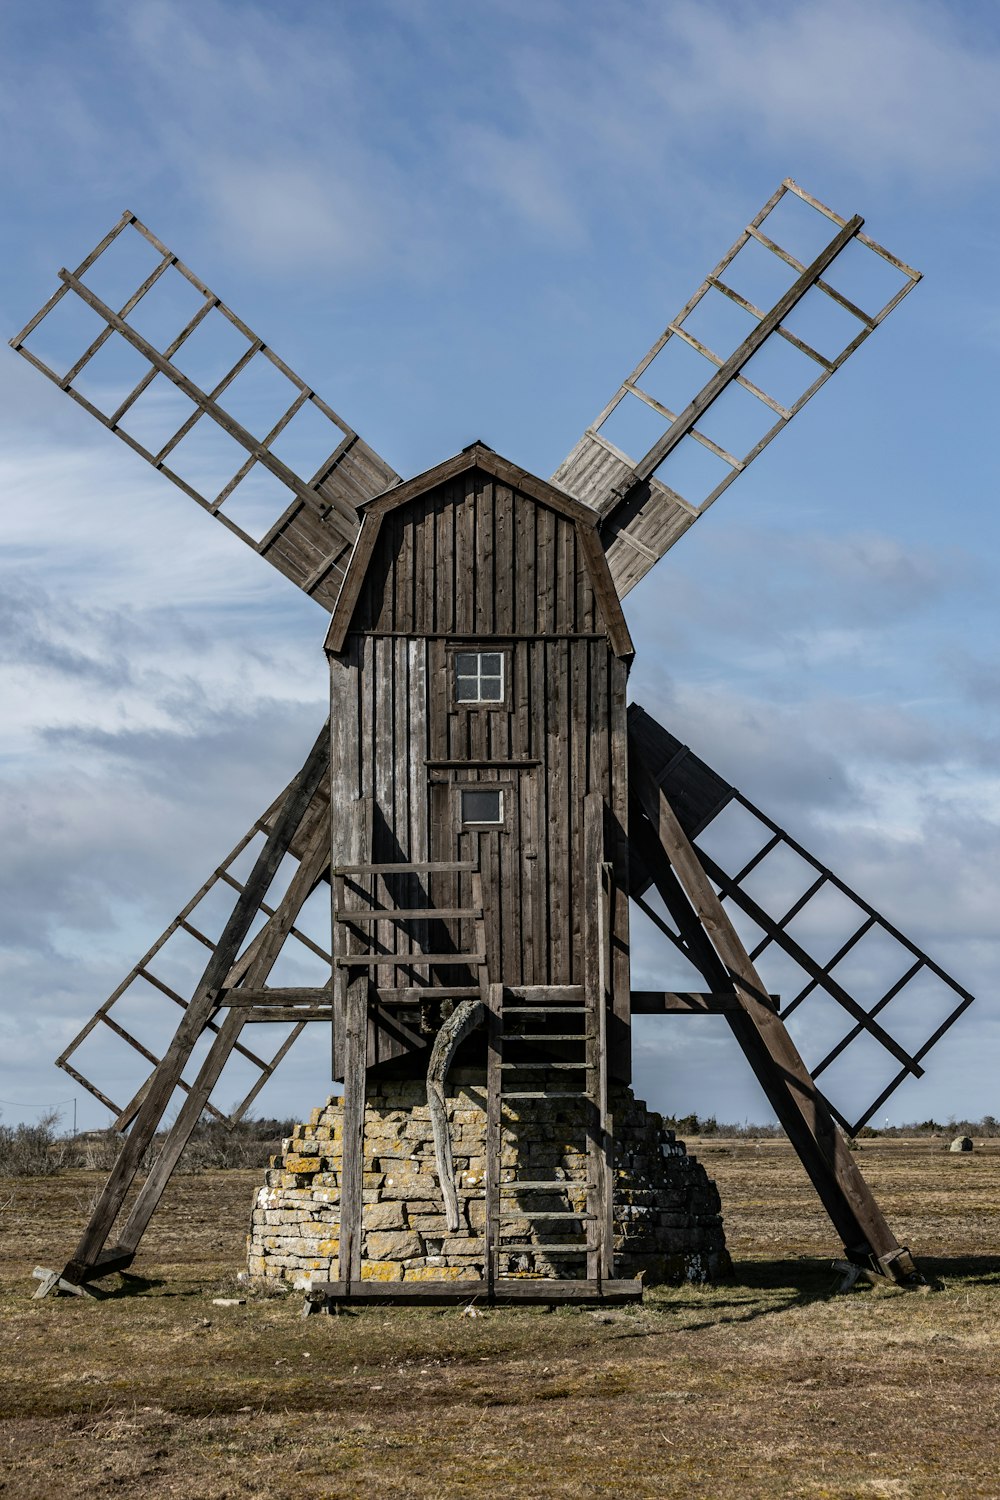 a wooden windmill sitting in the middle of a field